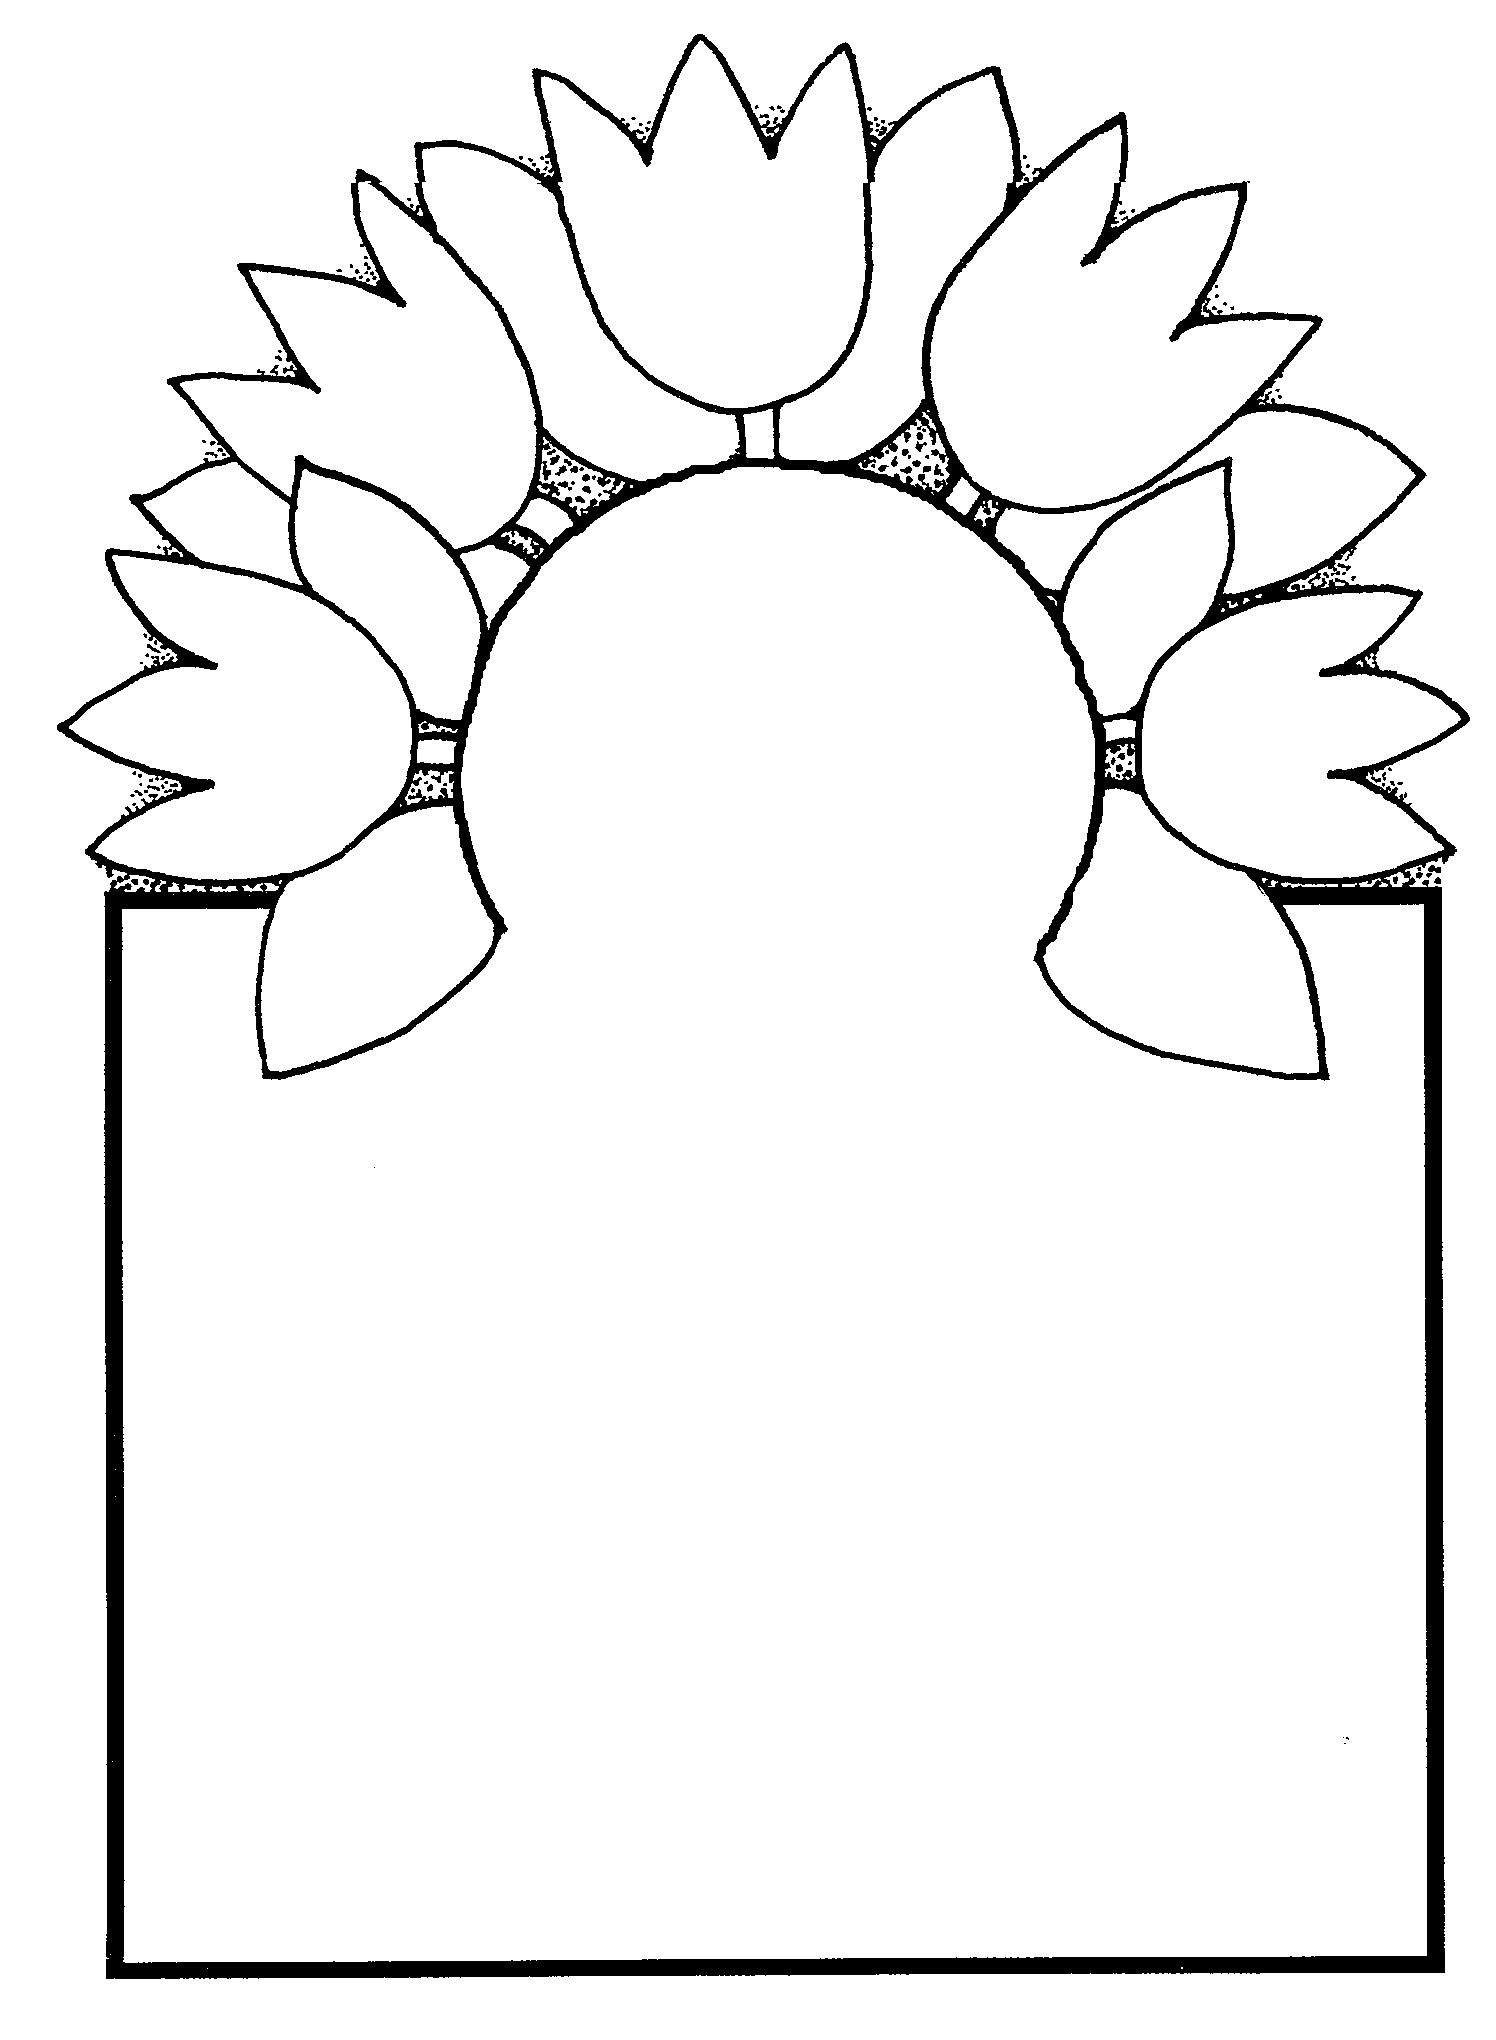 Flower line art and page borders clipart